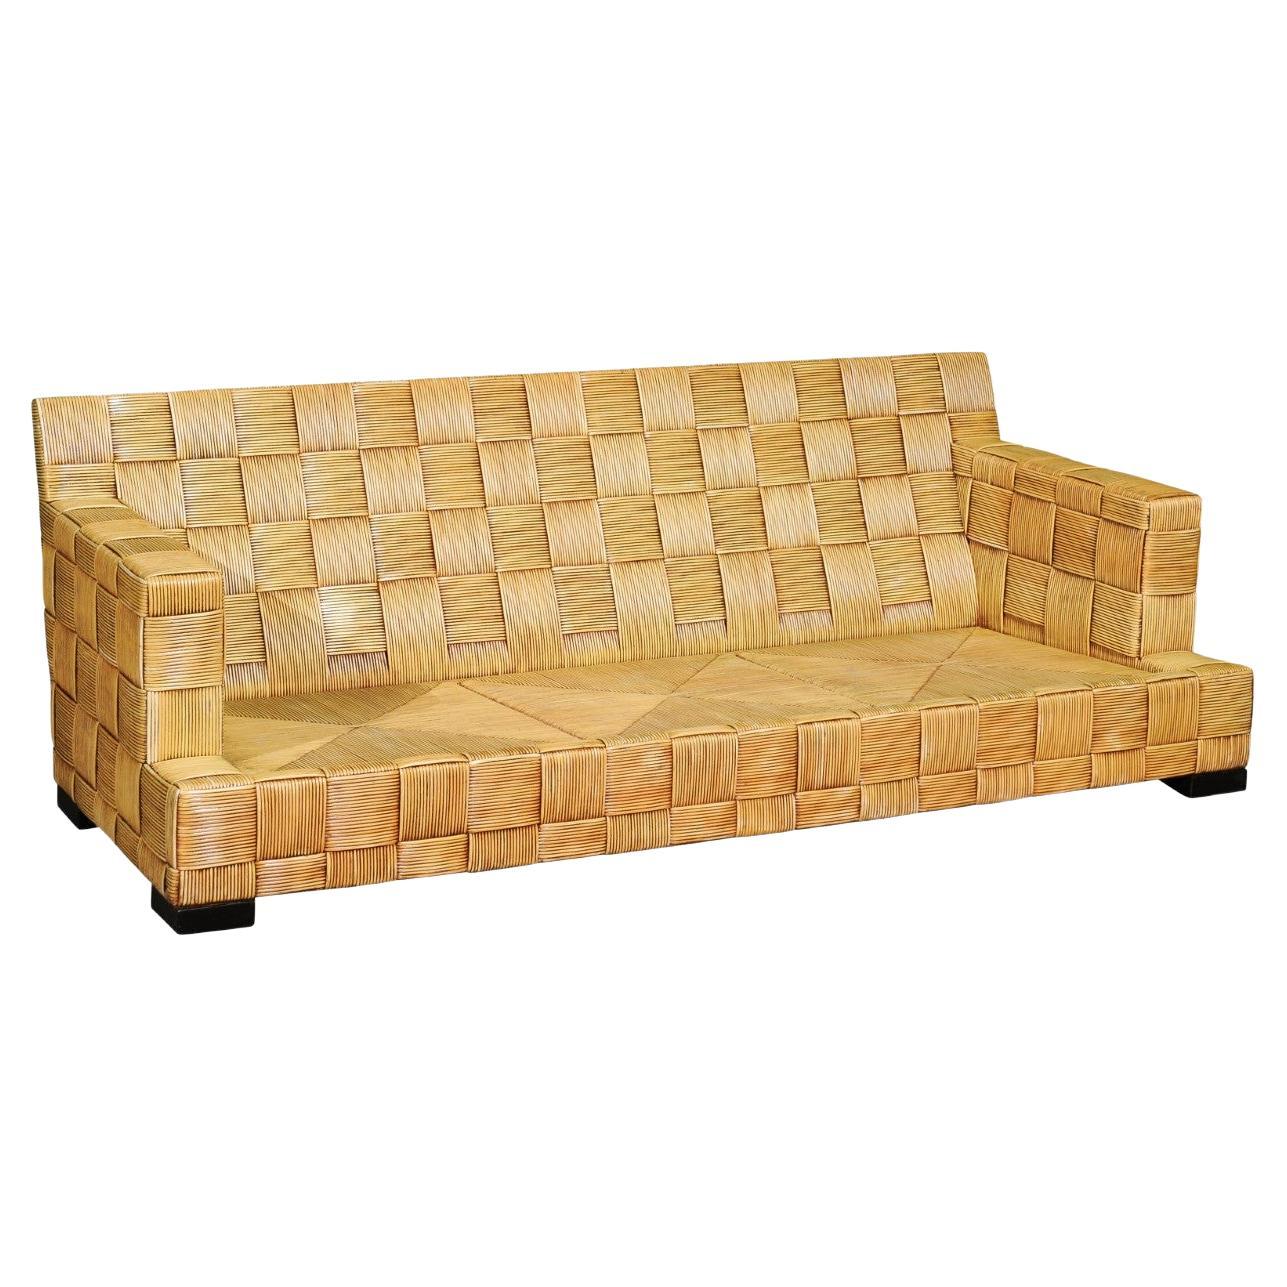 Stellar Vintage Block Island Collection Cane Sofa by John Hutton for Donghia